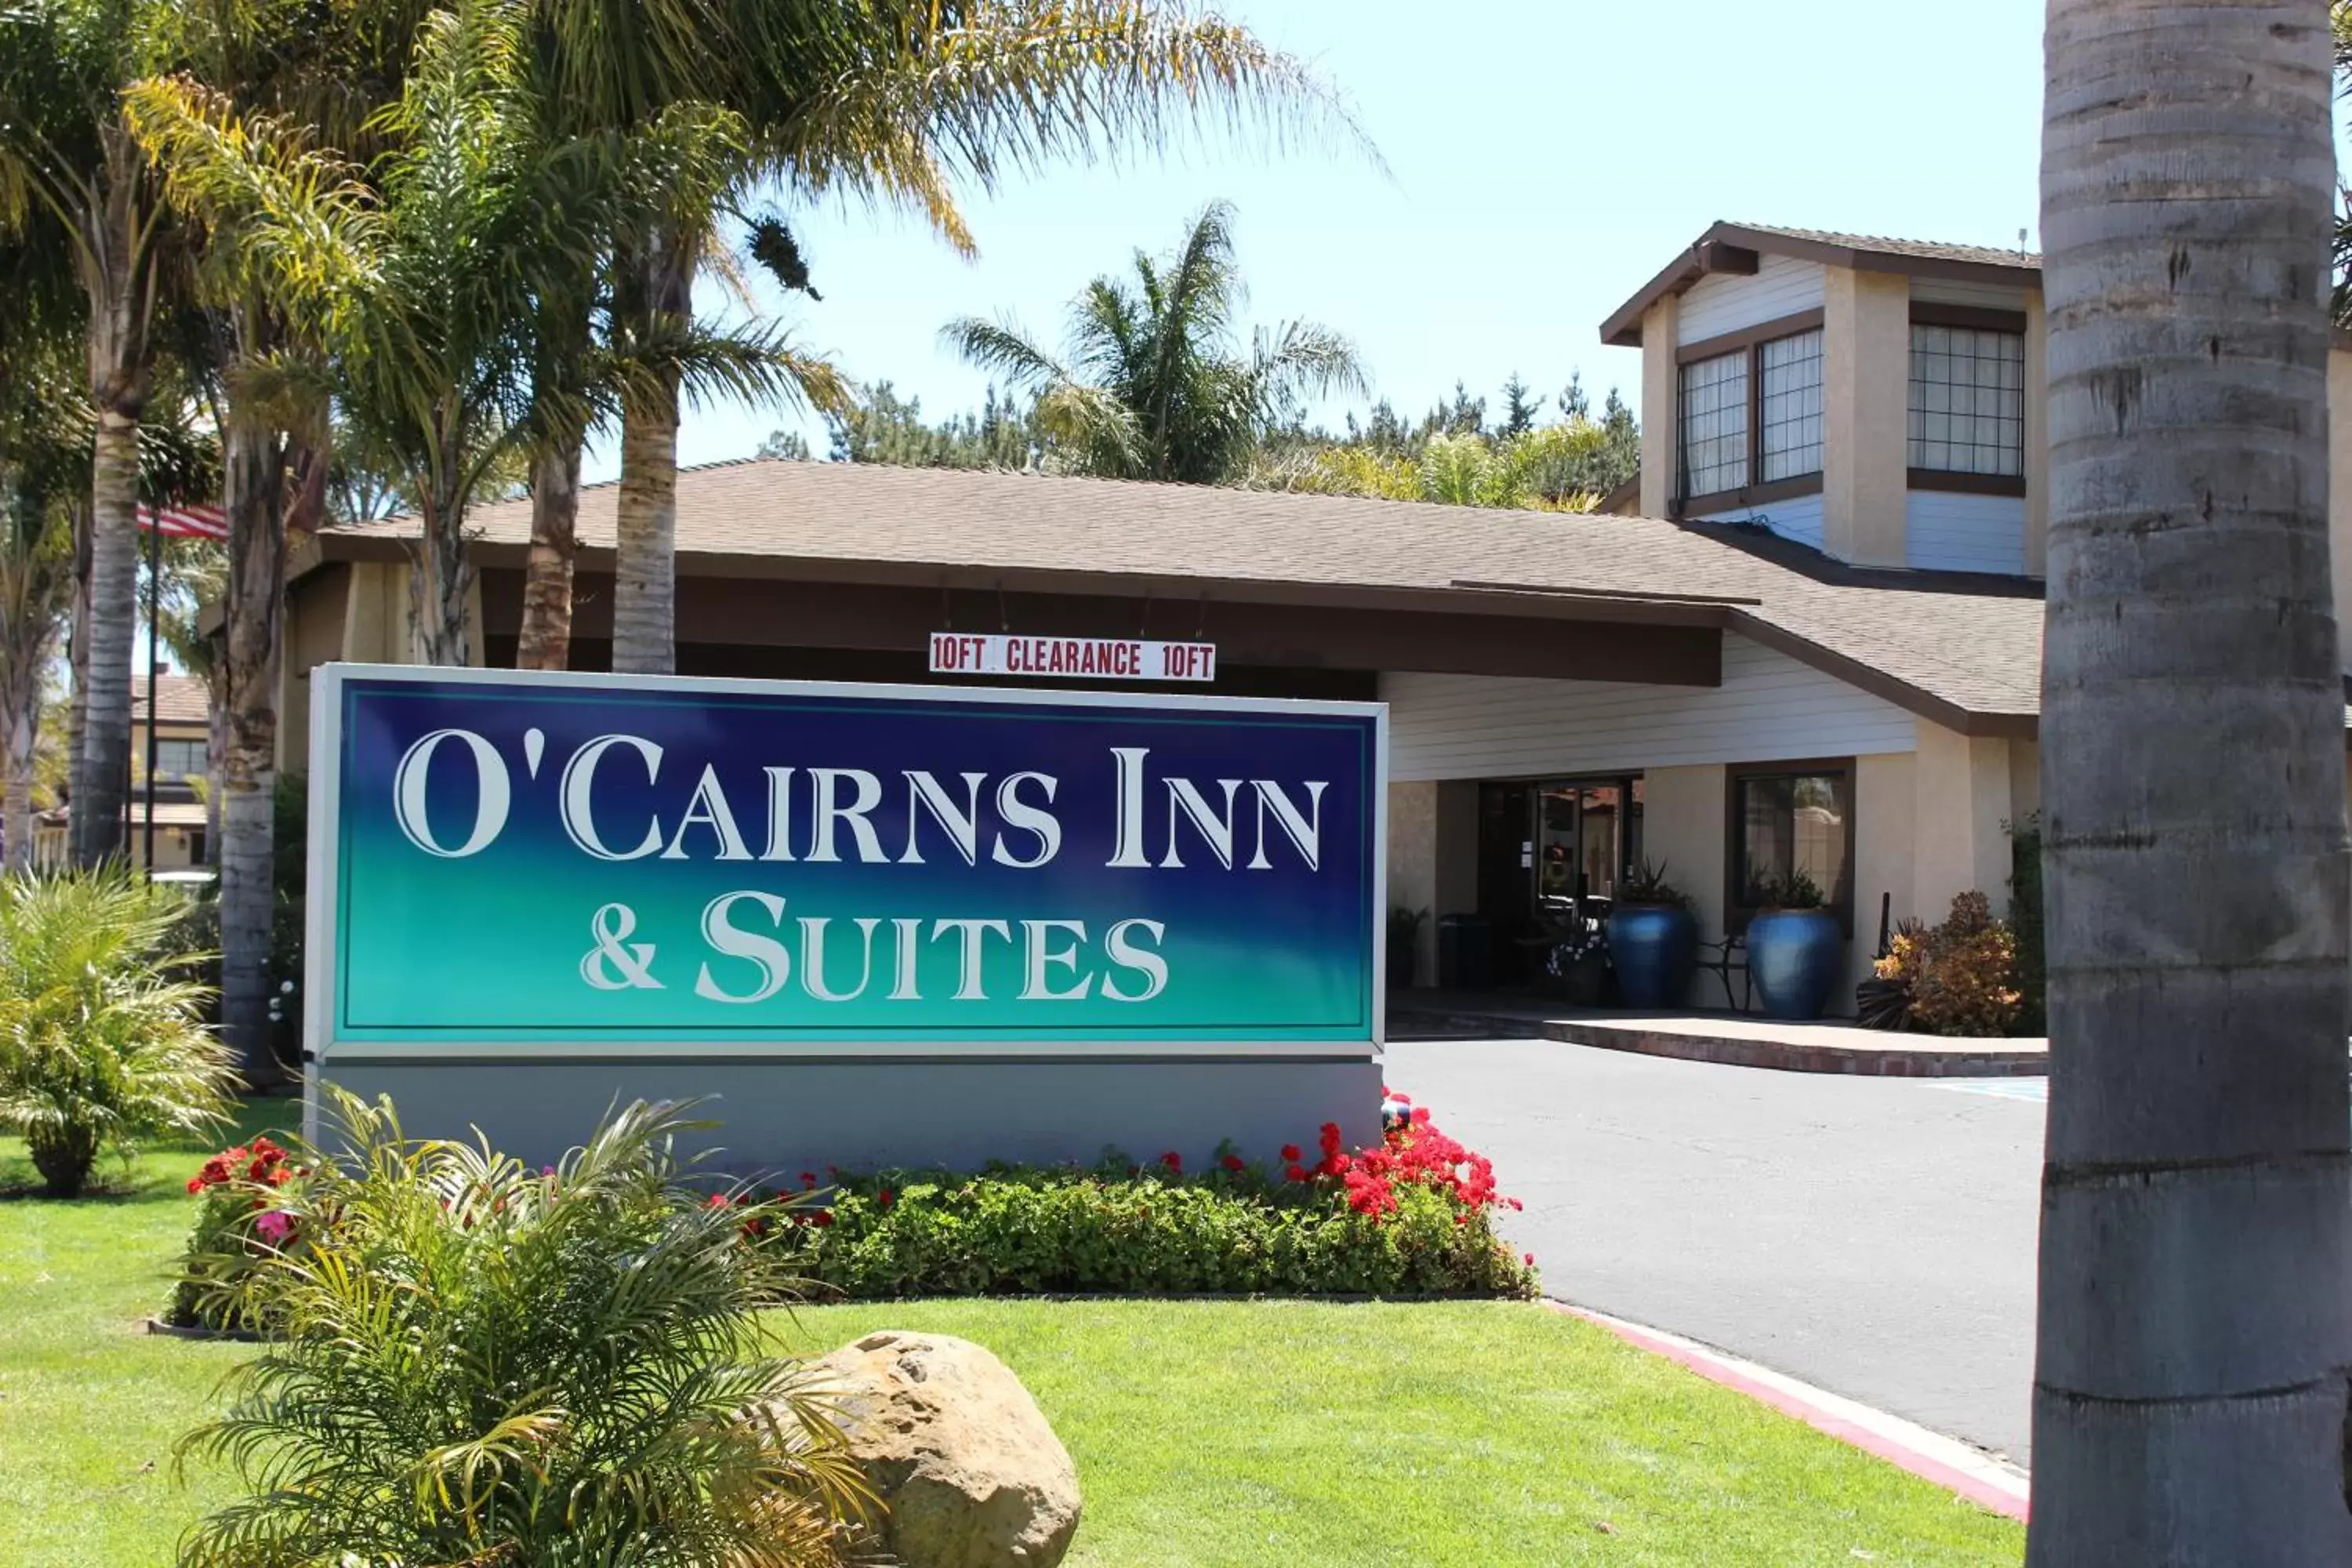 Facade/entrance in O'Cairns Inn and Suites